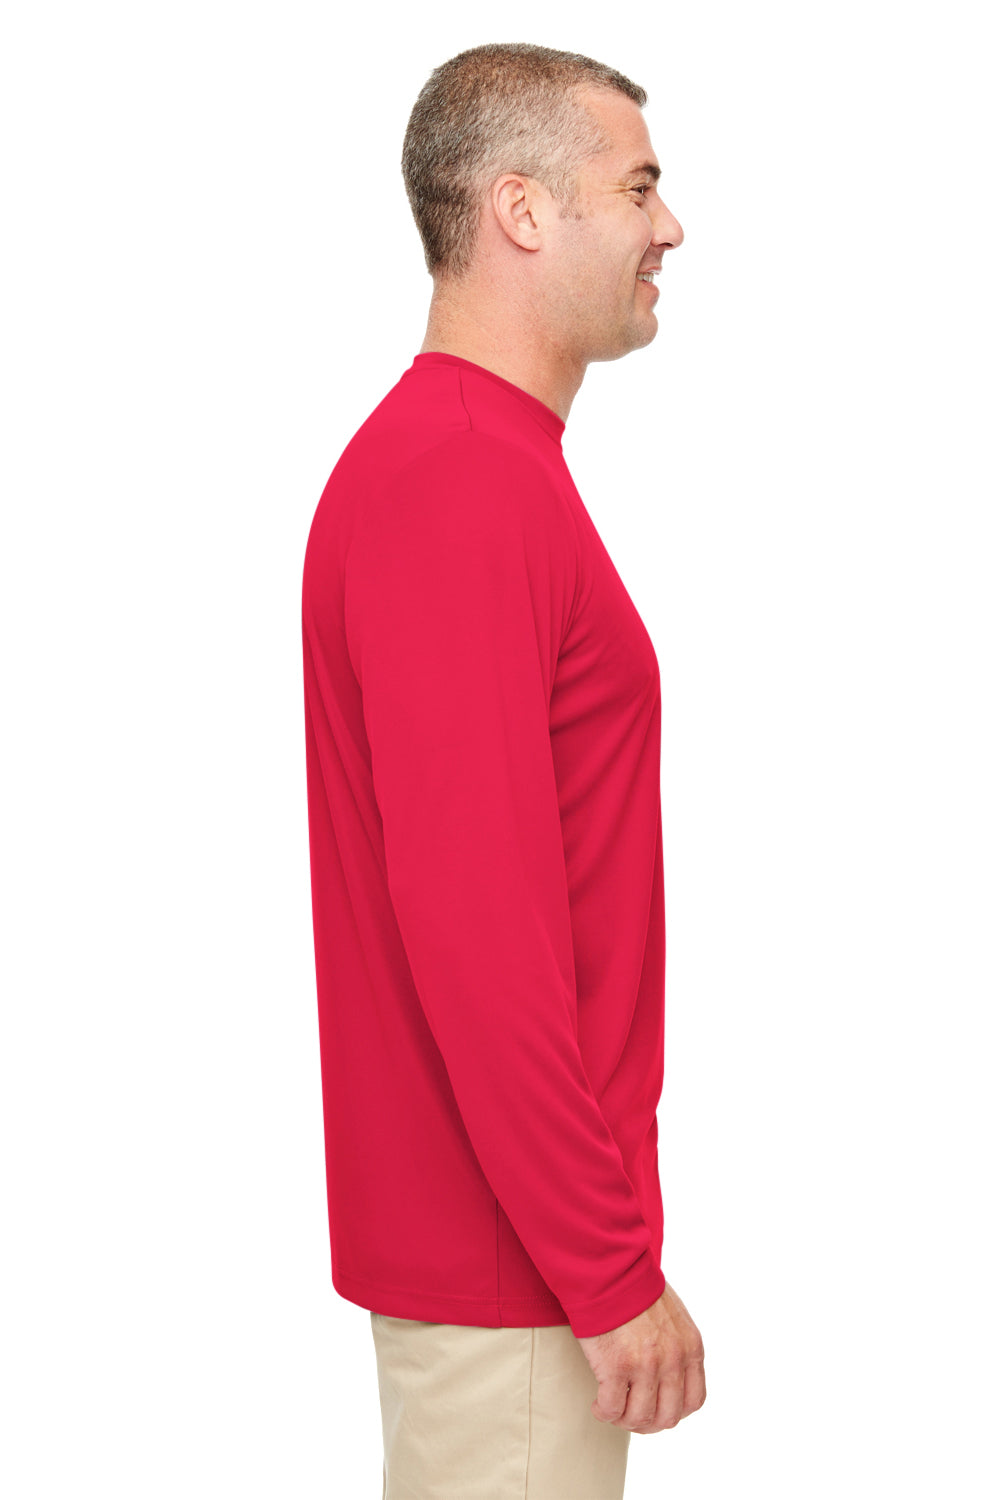 UltraClub 8622 Mens Cool & Dry Performance Moisture Wicking Long Sleeve Crewneck T-Shirt Red Side